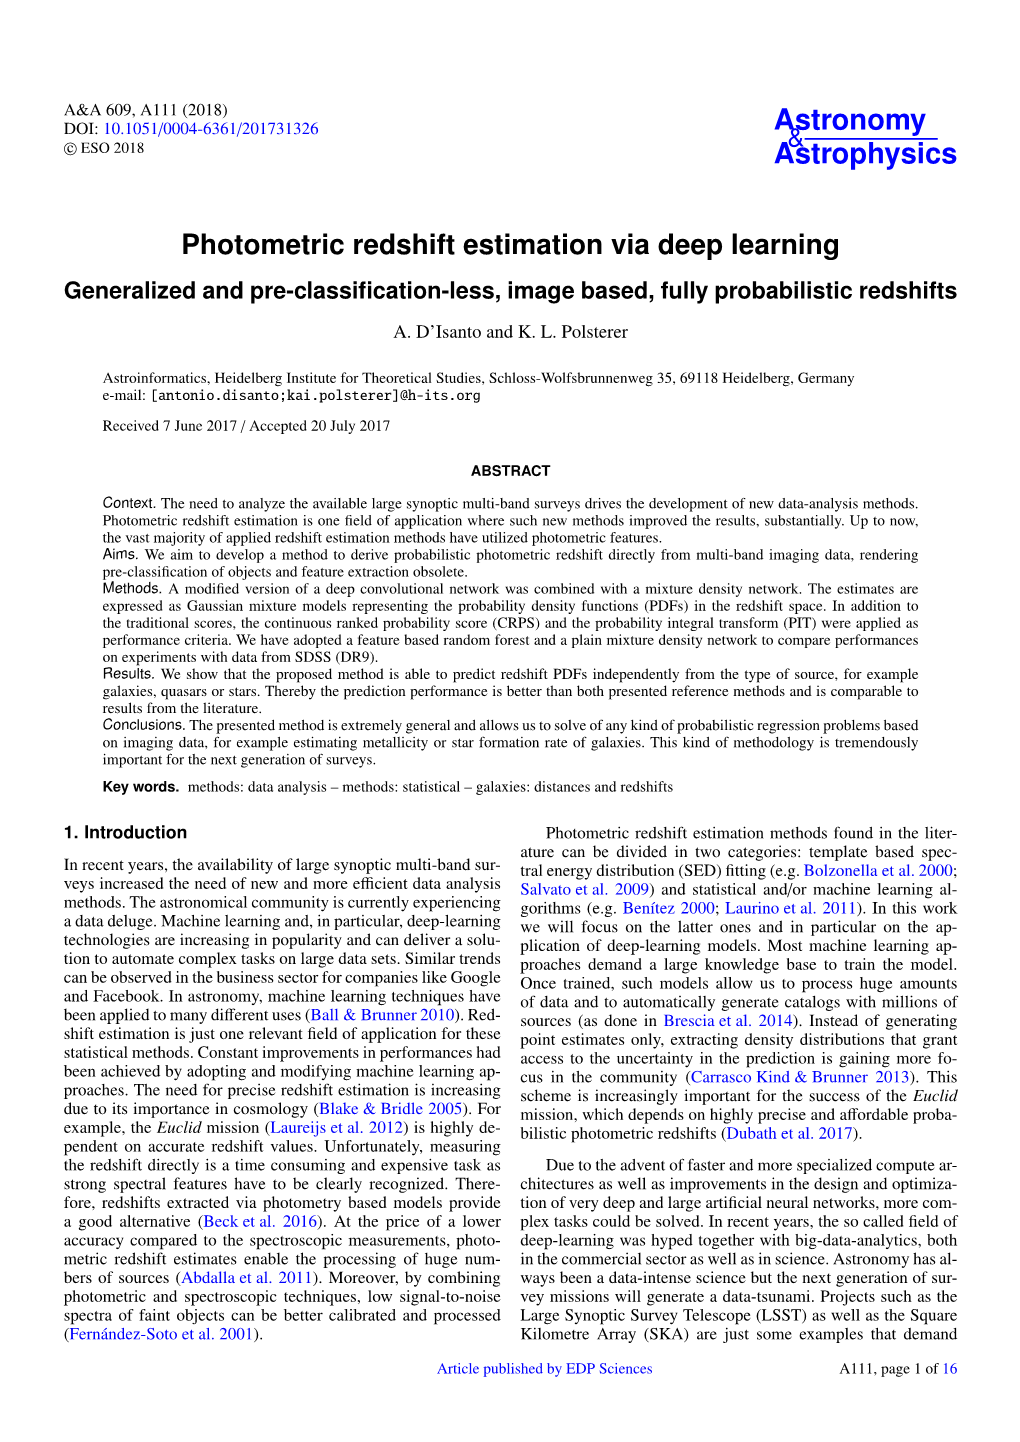 Photometric Redshift Estimation Via Deep Learning Generalized and Pre-Classiﬁcation-Less, Image Based, Fully Probabilistic Redshifts